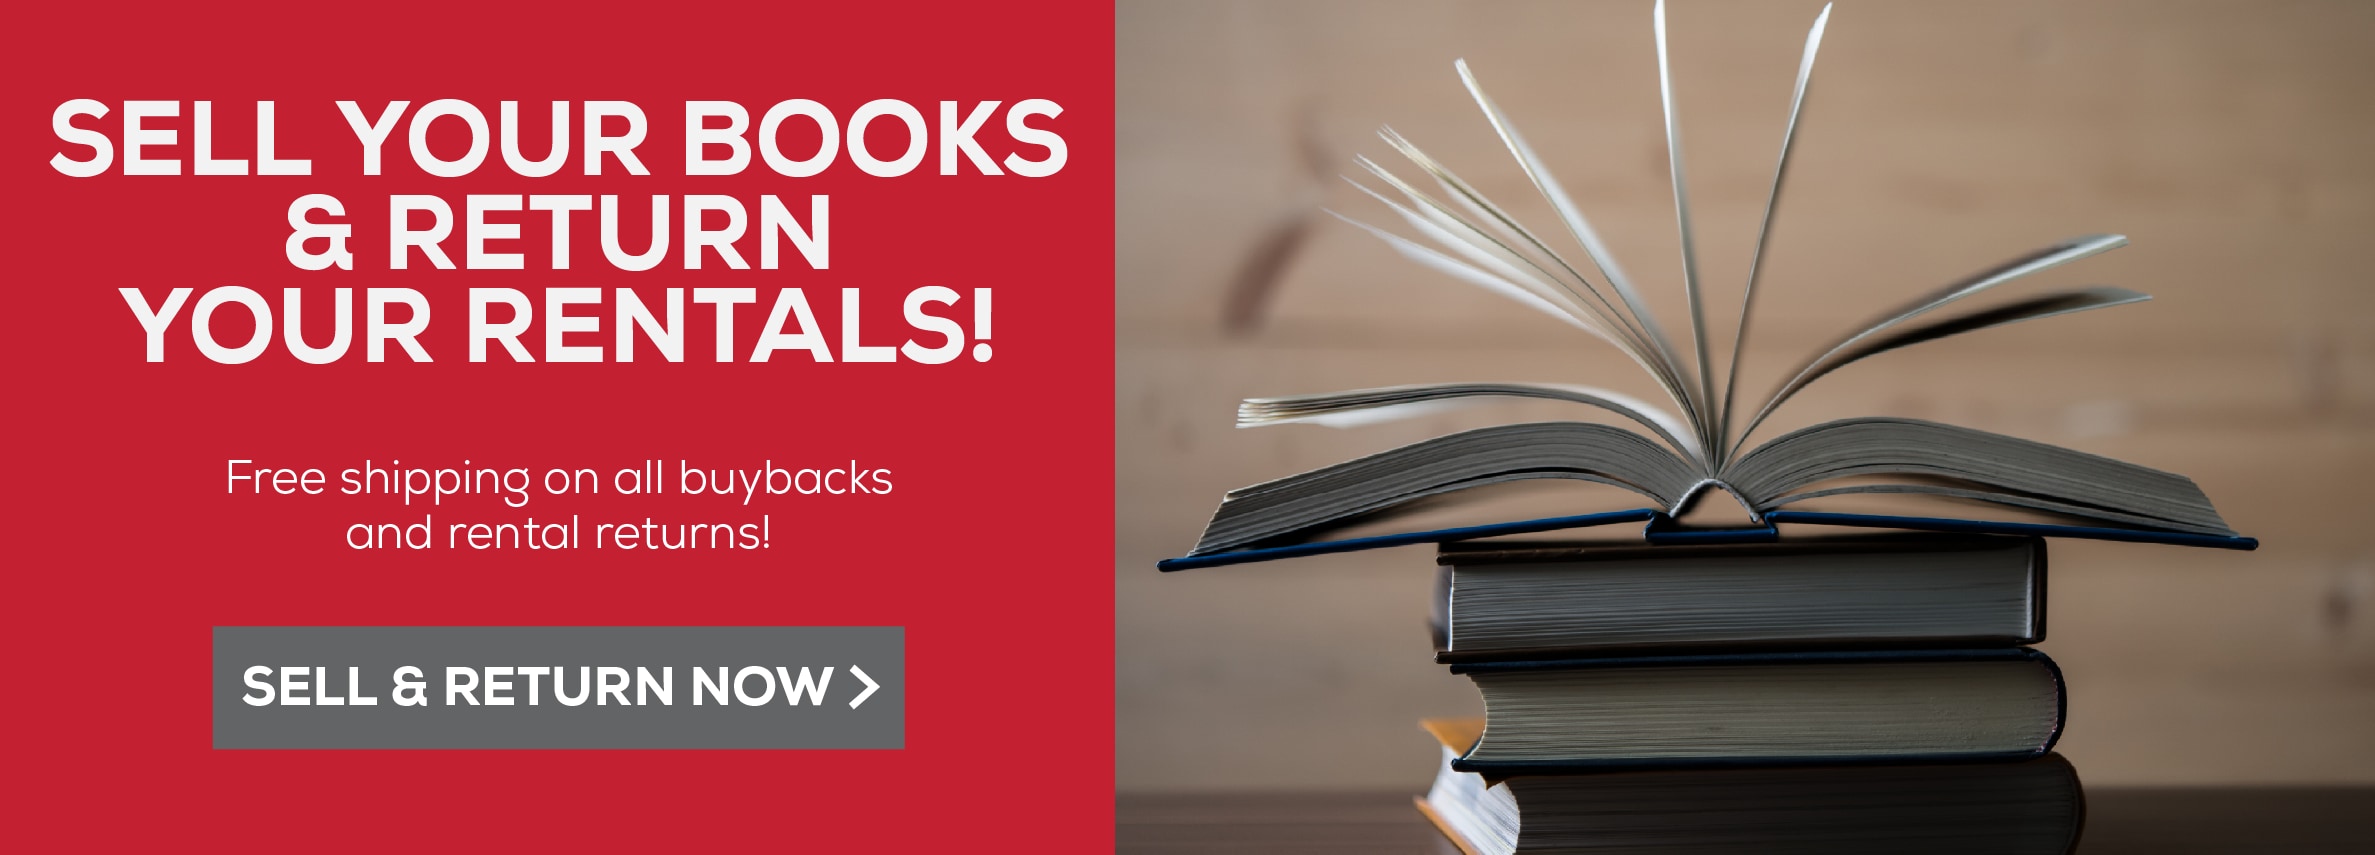 Sell your books and return your rentals! Free shipping on all buybacks and rental returns. Sell and return now.